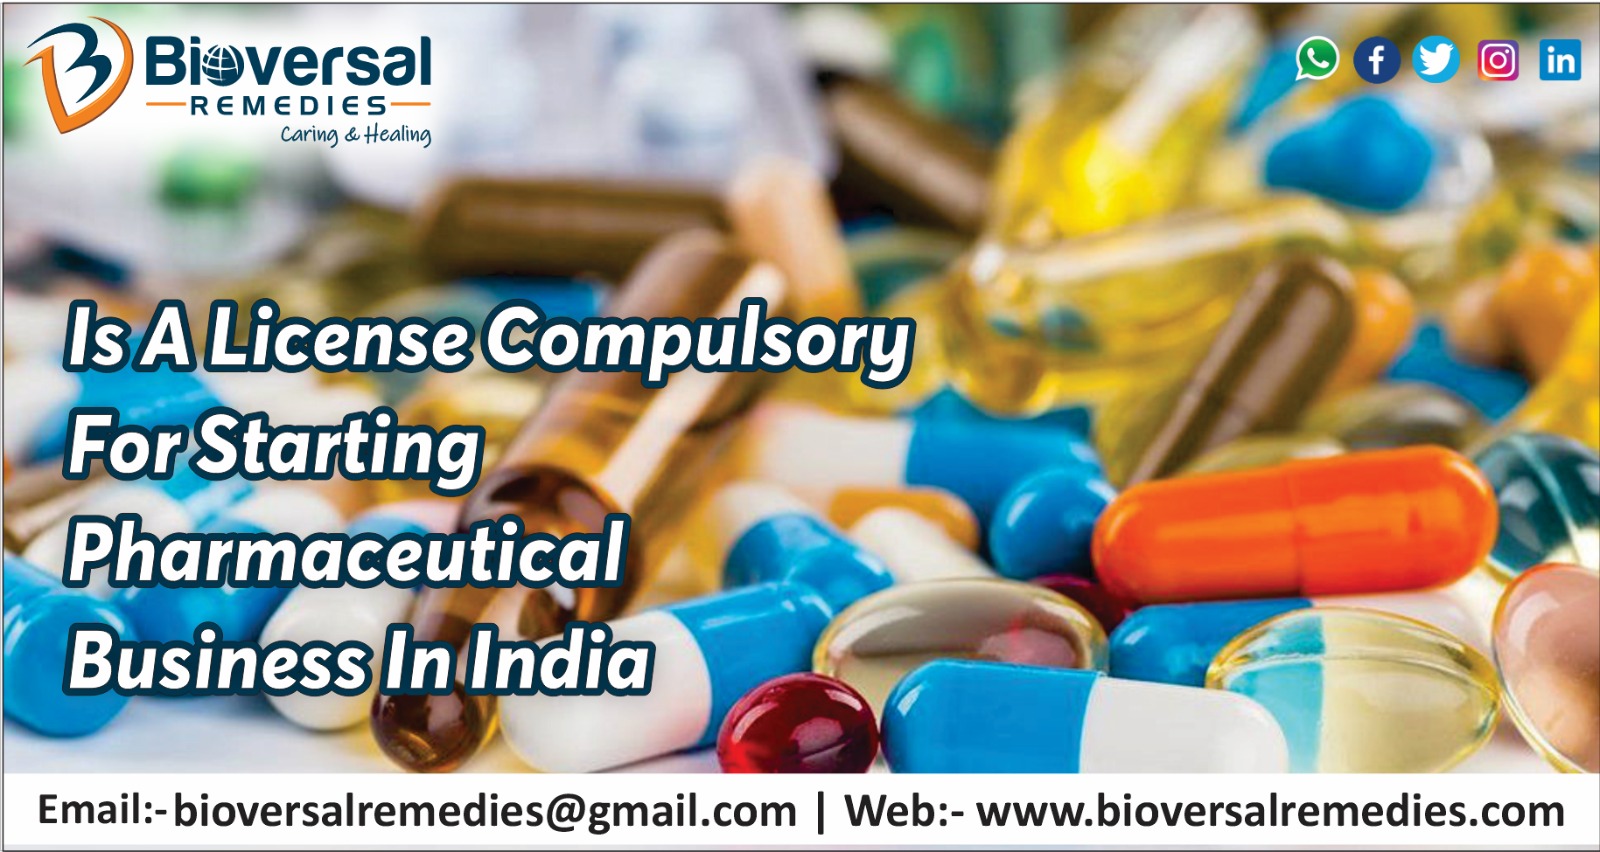 Is A License Compulsory For Starting Pharma Business In India